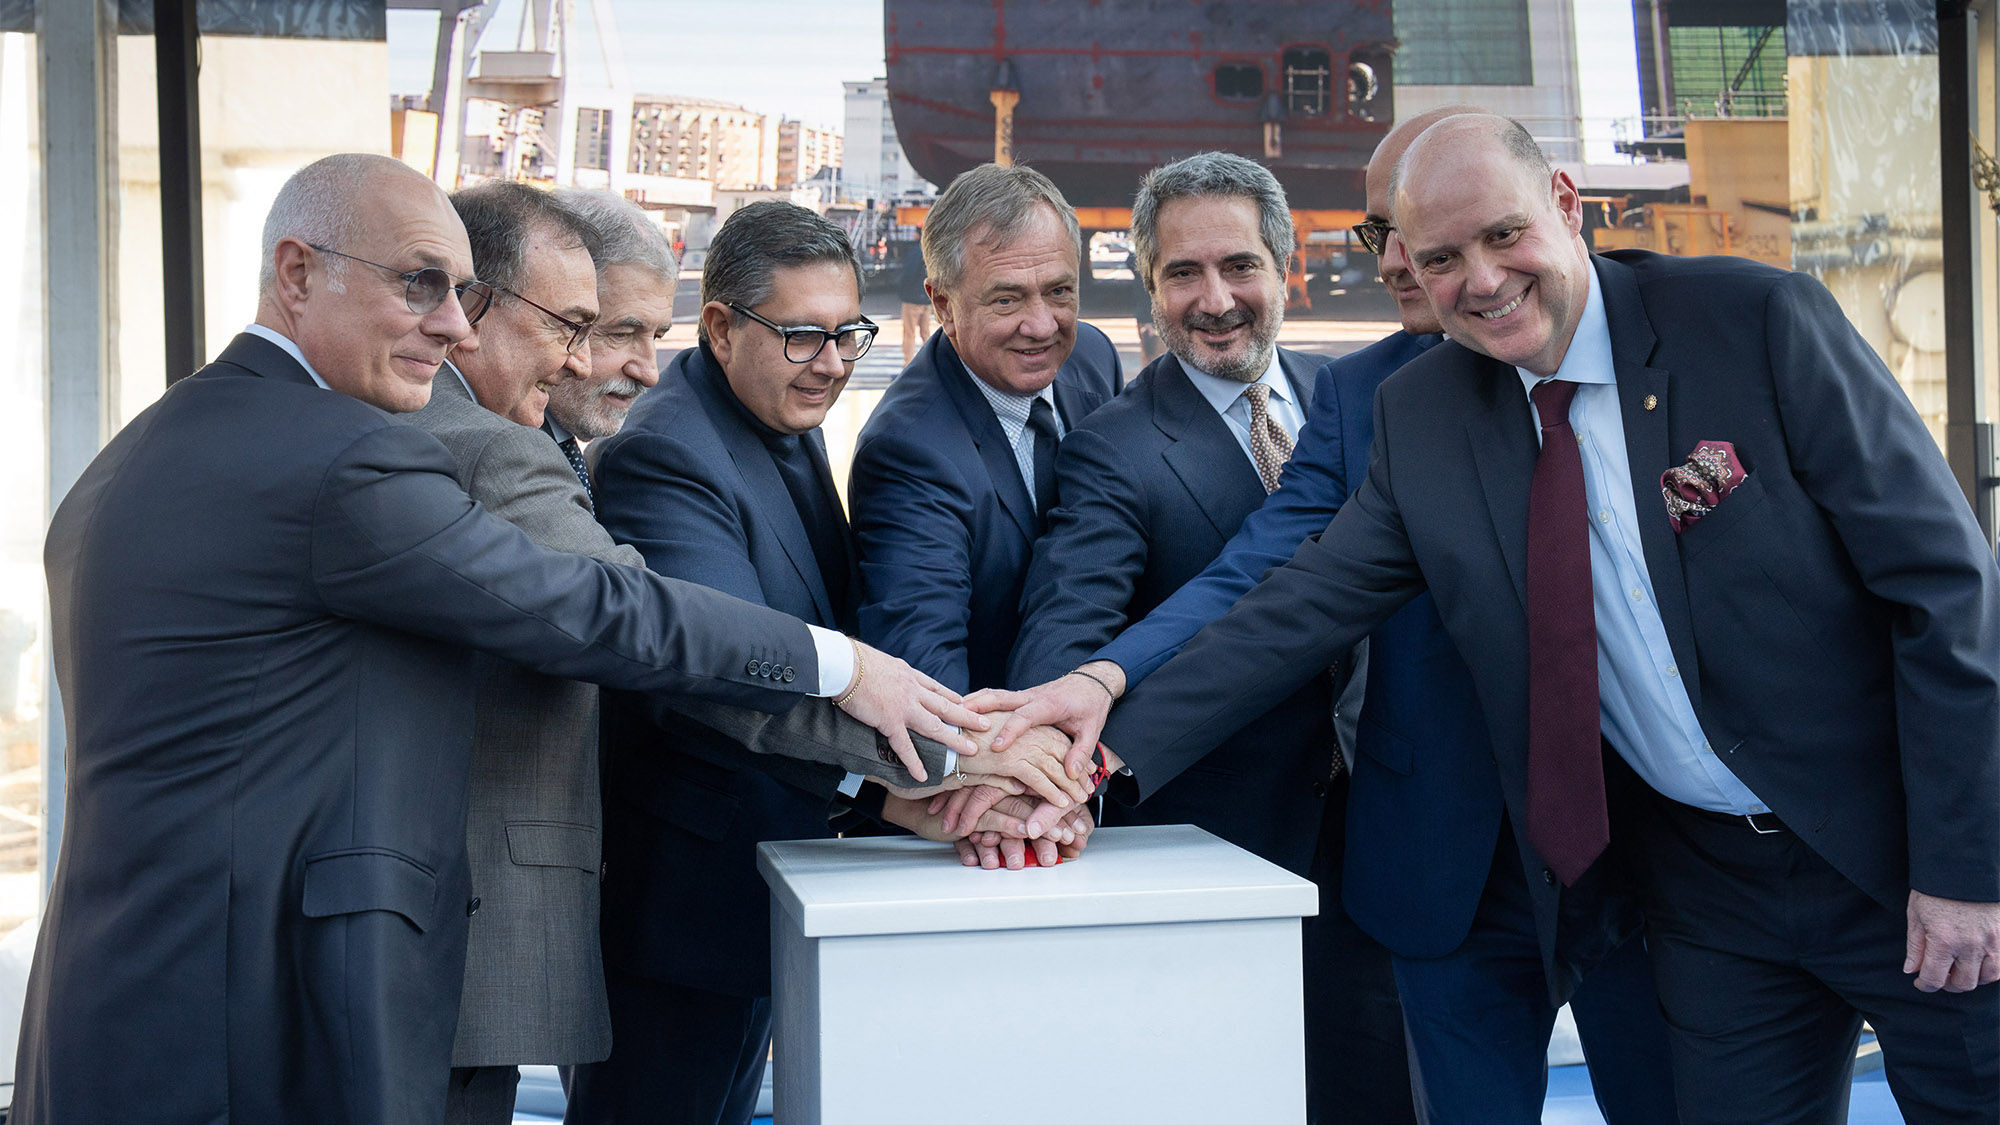 Explora Journeys and MSC Group executives at the coin-laying ceremony for the Explora II.